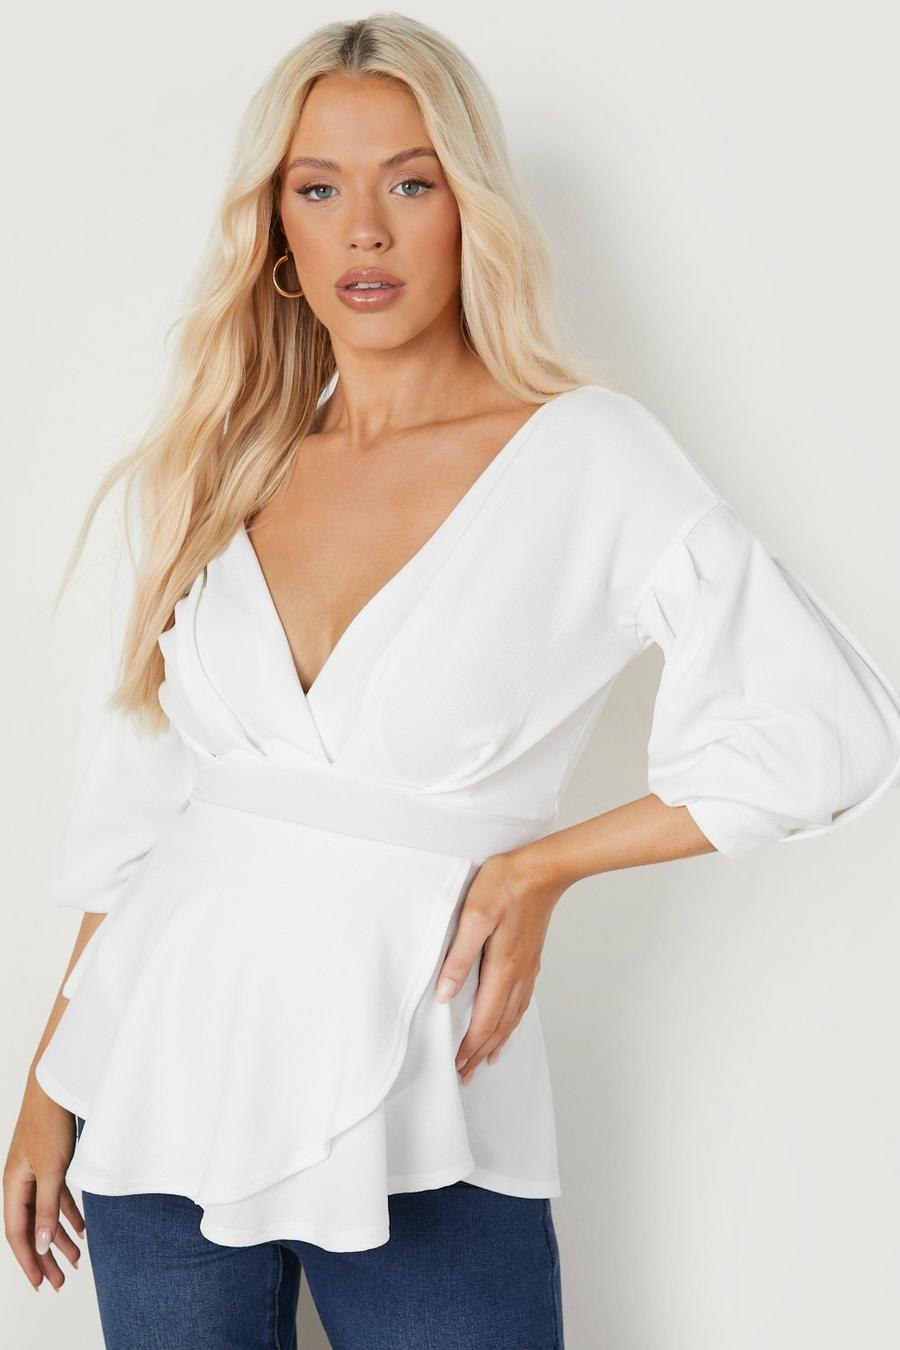 Ivory white Maternity Off The Shoulder Wrap Top